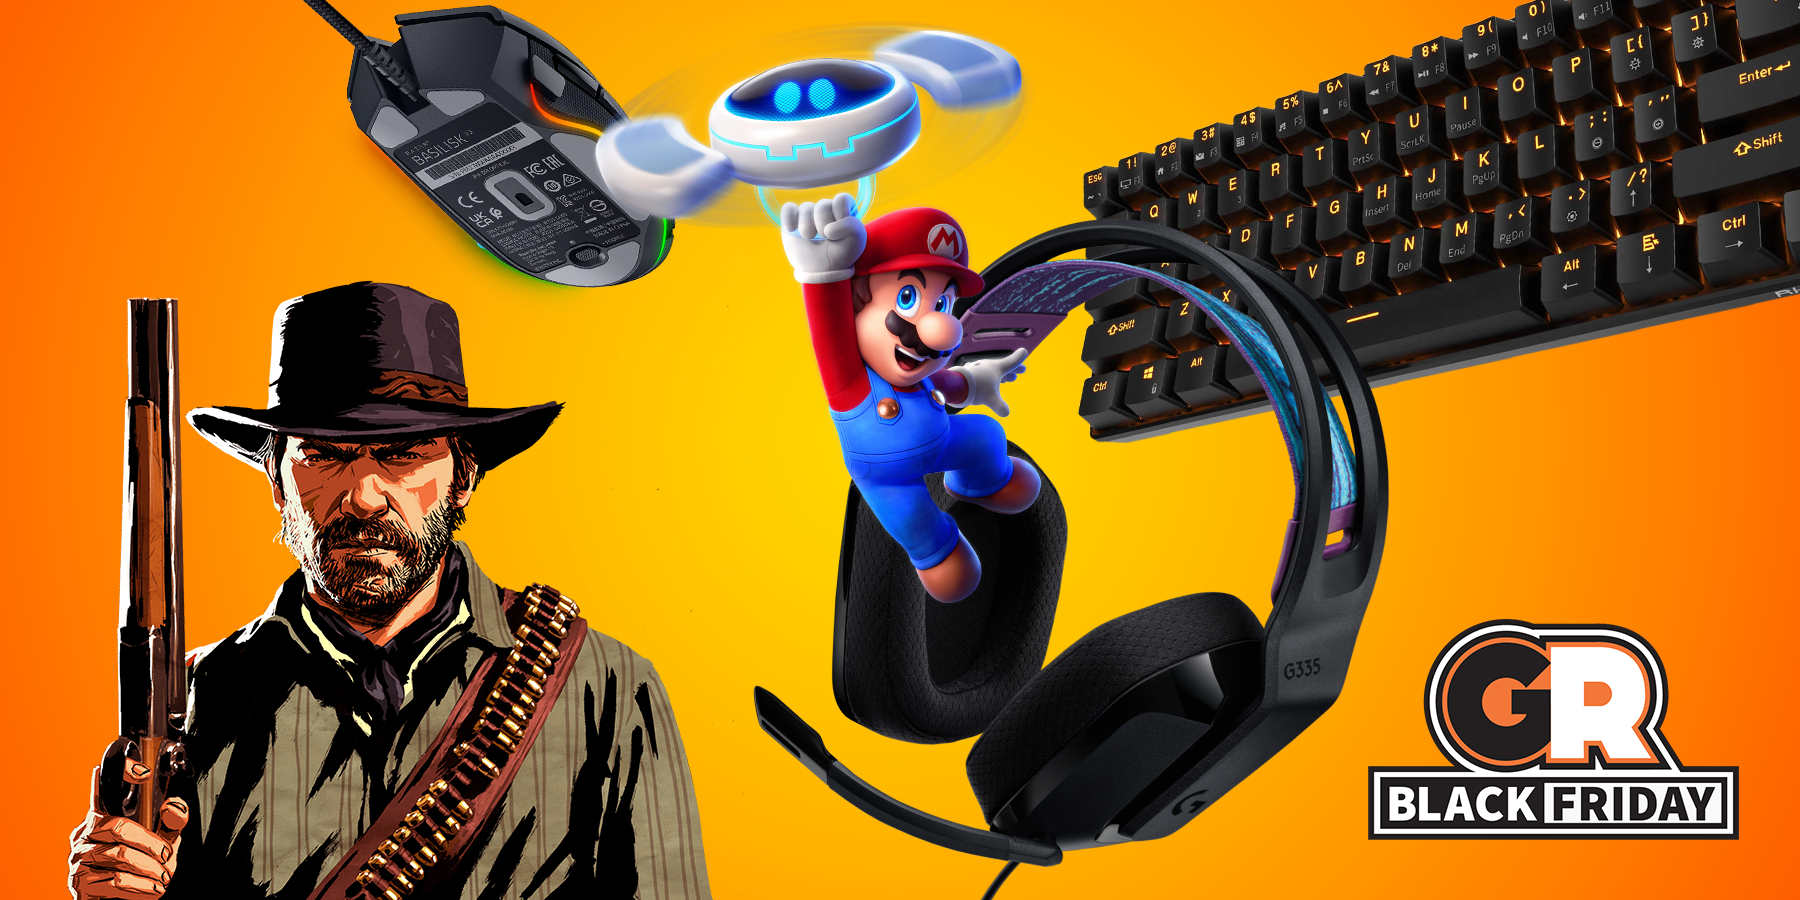 https://static0.gamerantimages.com/wordpress/wp-content/uploads/2023/11/best-black-friday-2023-under-50-dollars-deals-headsets-keyboards-games-and-more-gamerant-feature.png